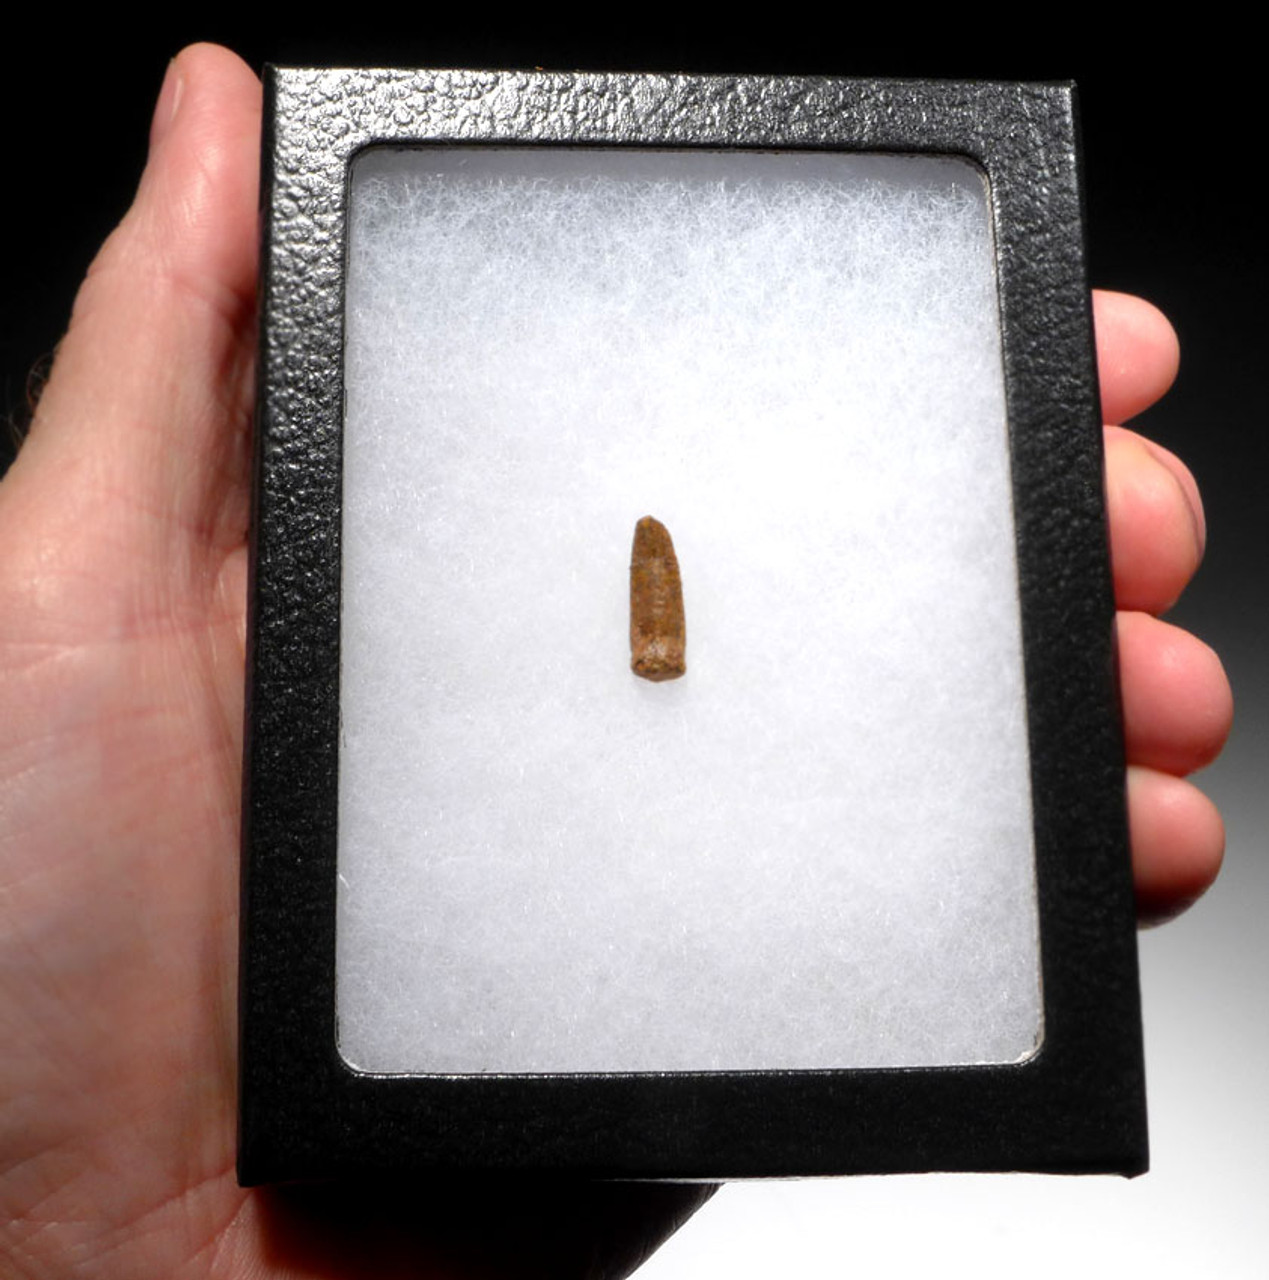 THE SMALLEST FOSSIL TOOTH WE EVER HAD FROM A BABY DIPLODOCOID SAUROPOD DINOSAUR *DT9-030